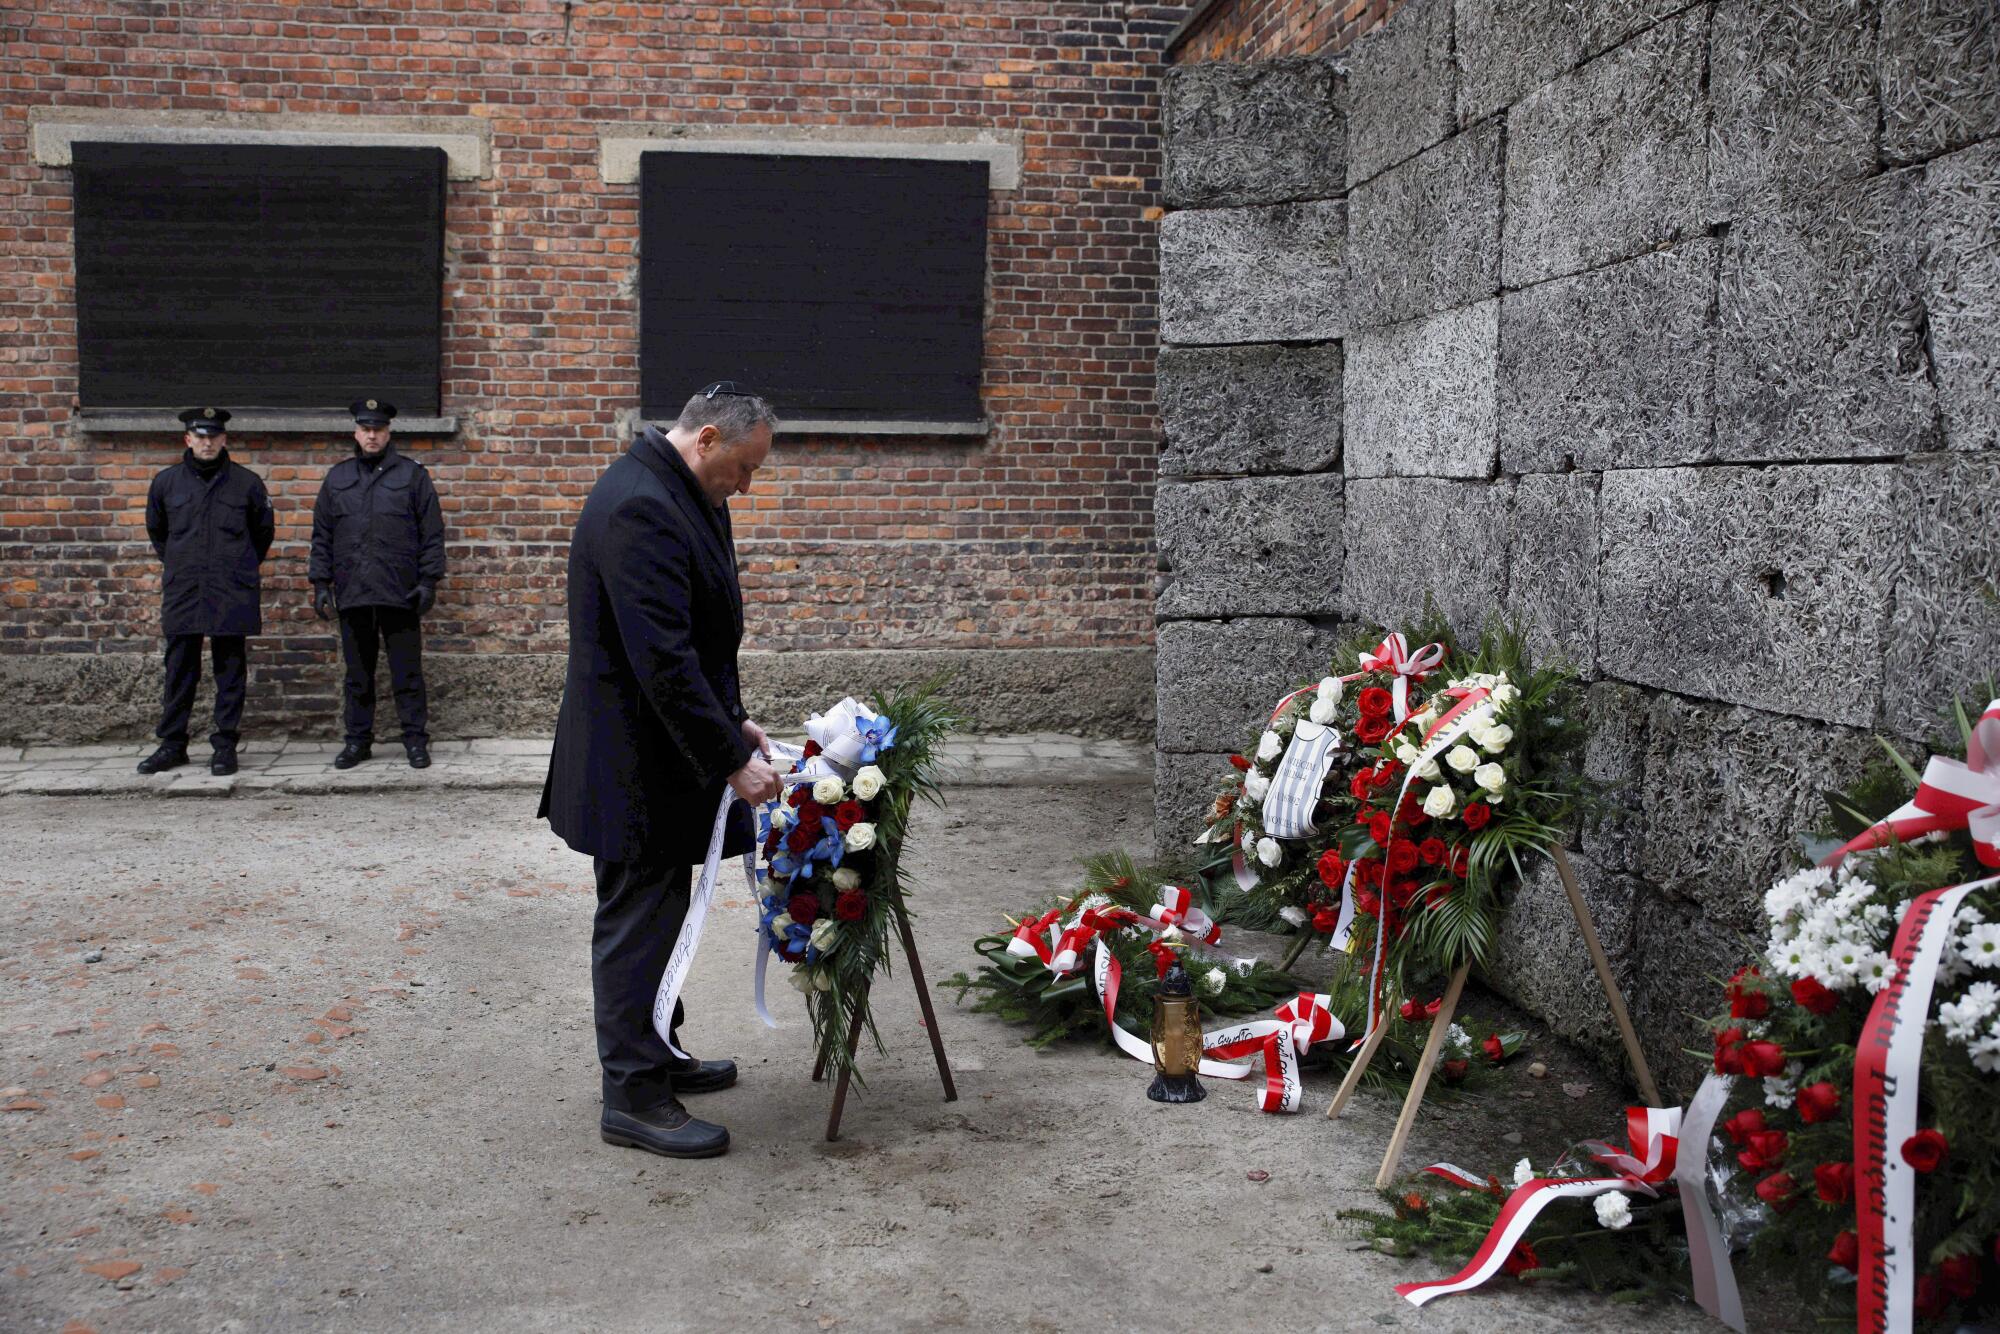 Second Gentleman Douglas Emhoff lays a wreath during his visit to the former Nazi German concentration camp.